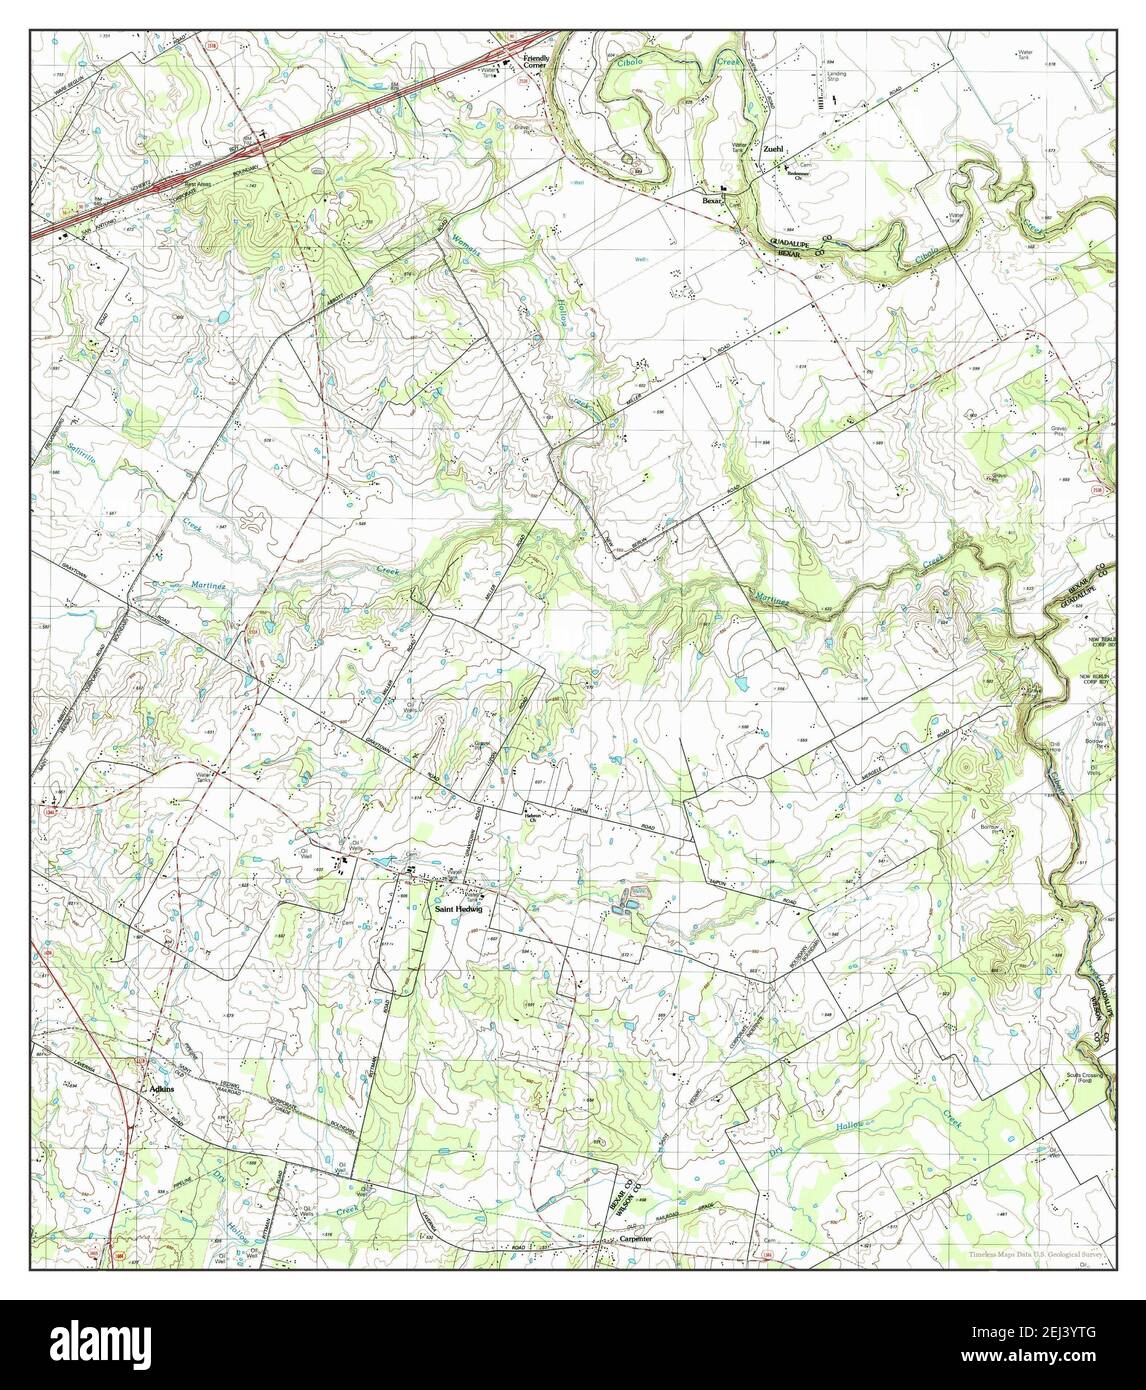 Saint Hedwig, Texas, map 1992, 1:24000, United States of America by Timeless Maps, data U.S. Geological Survey Stock Photo